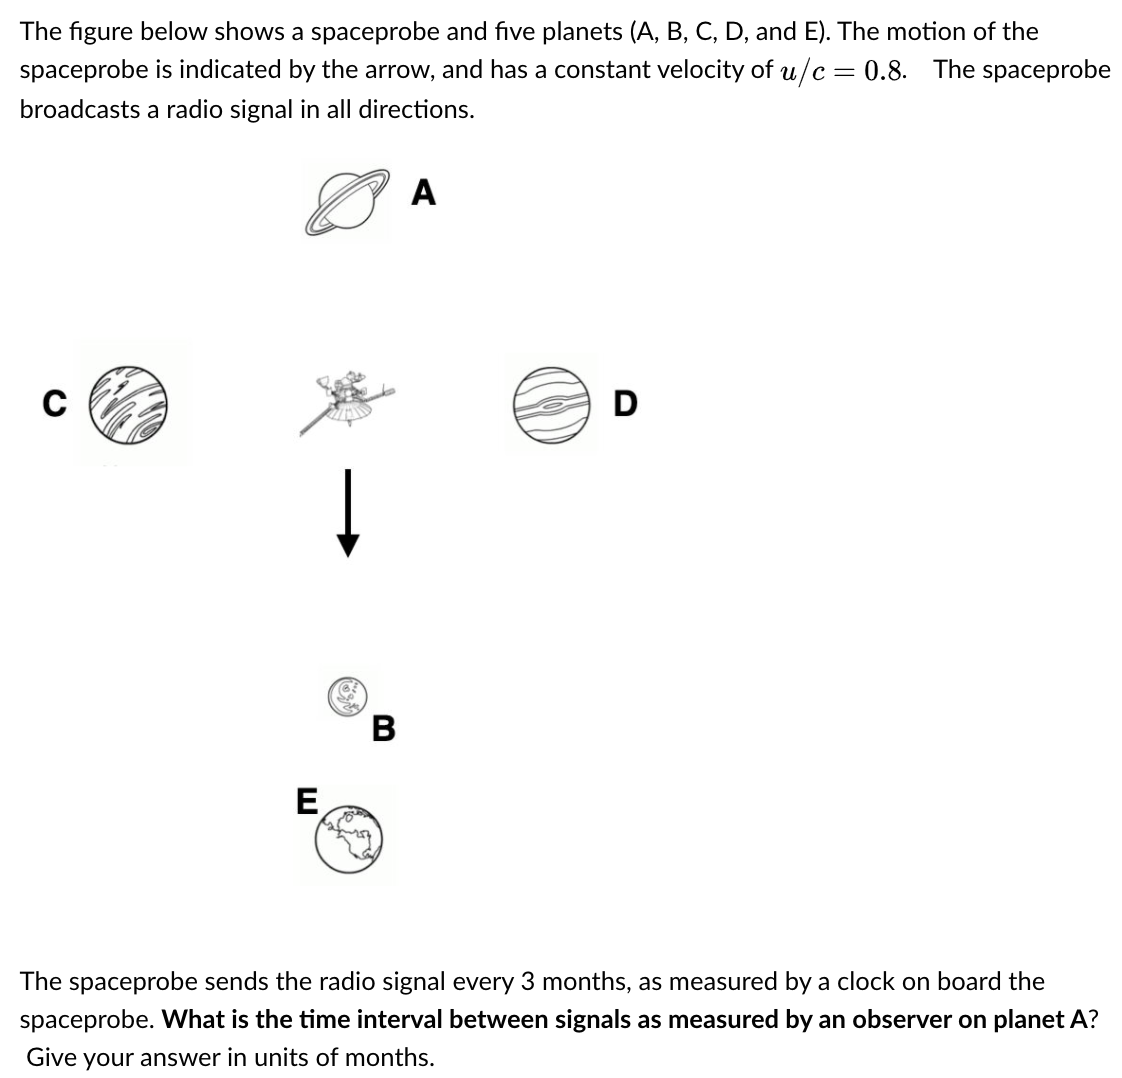 The figure below shows a spaceprobe and five planets (A, B, C, D, and E). The motion of the
spaceprobe is indicated by the arrow, and has a constant velocity of u/c = 0.8. The spaceprobe
broadcasts a radio signal in all directions.
A
D
B
E
The spaceprobe sends the radio signal every 3 months, as measured by a clock on board the
spaceprobe. What is the time interval between signals as measured by an observer on planet A?
Give your answer in units of months.
